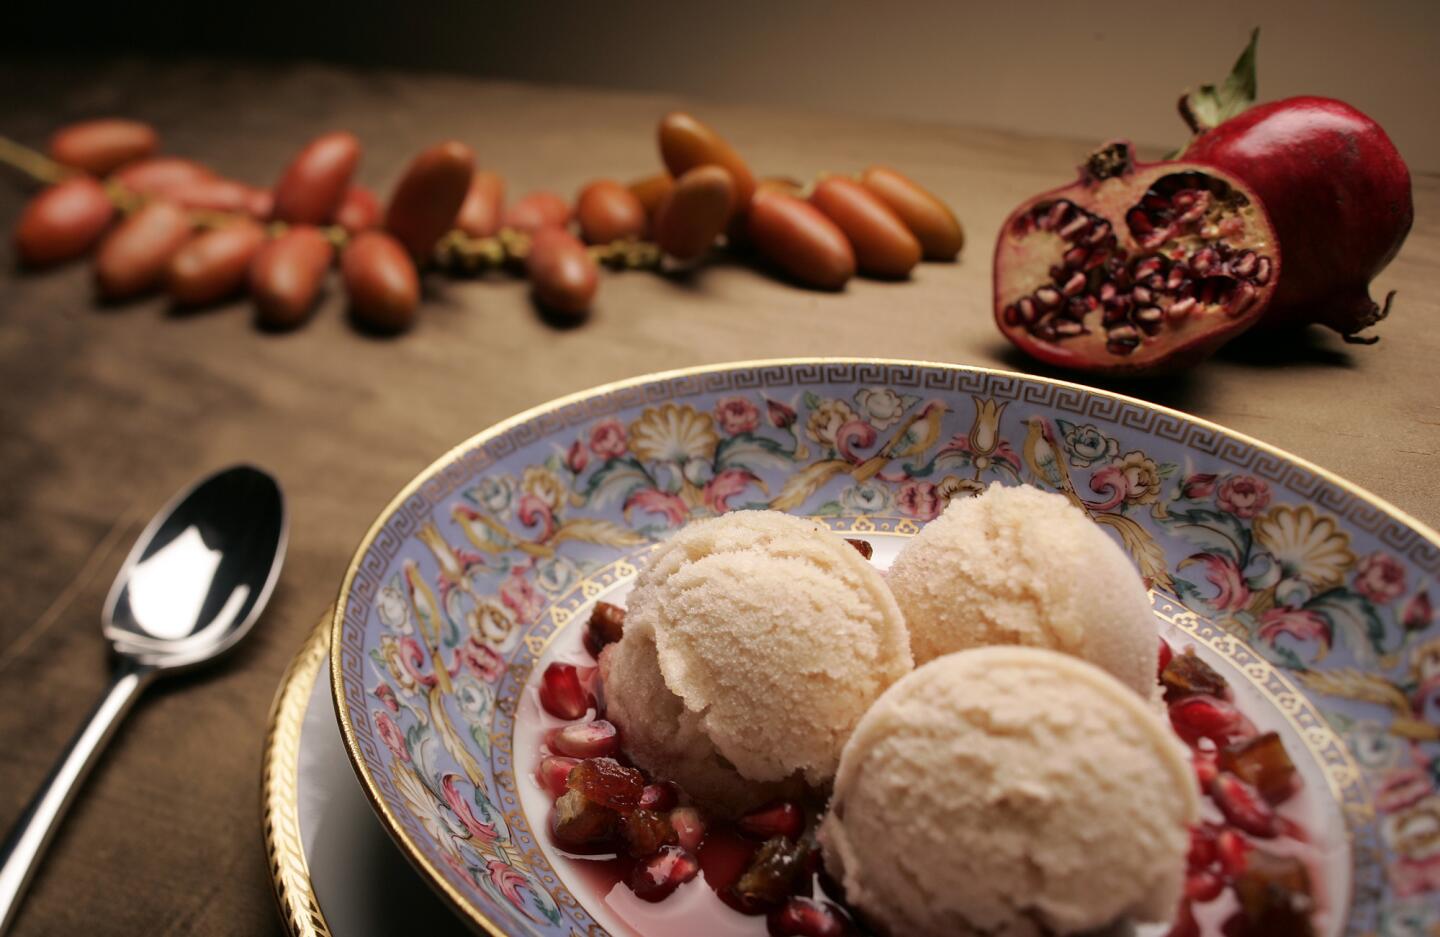 Apple and honey sorbet with pomegranate sauce. Recipe